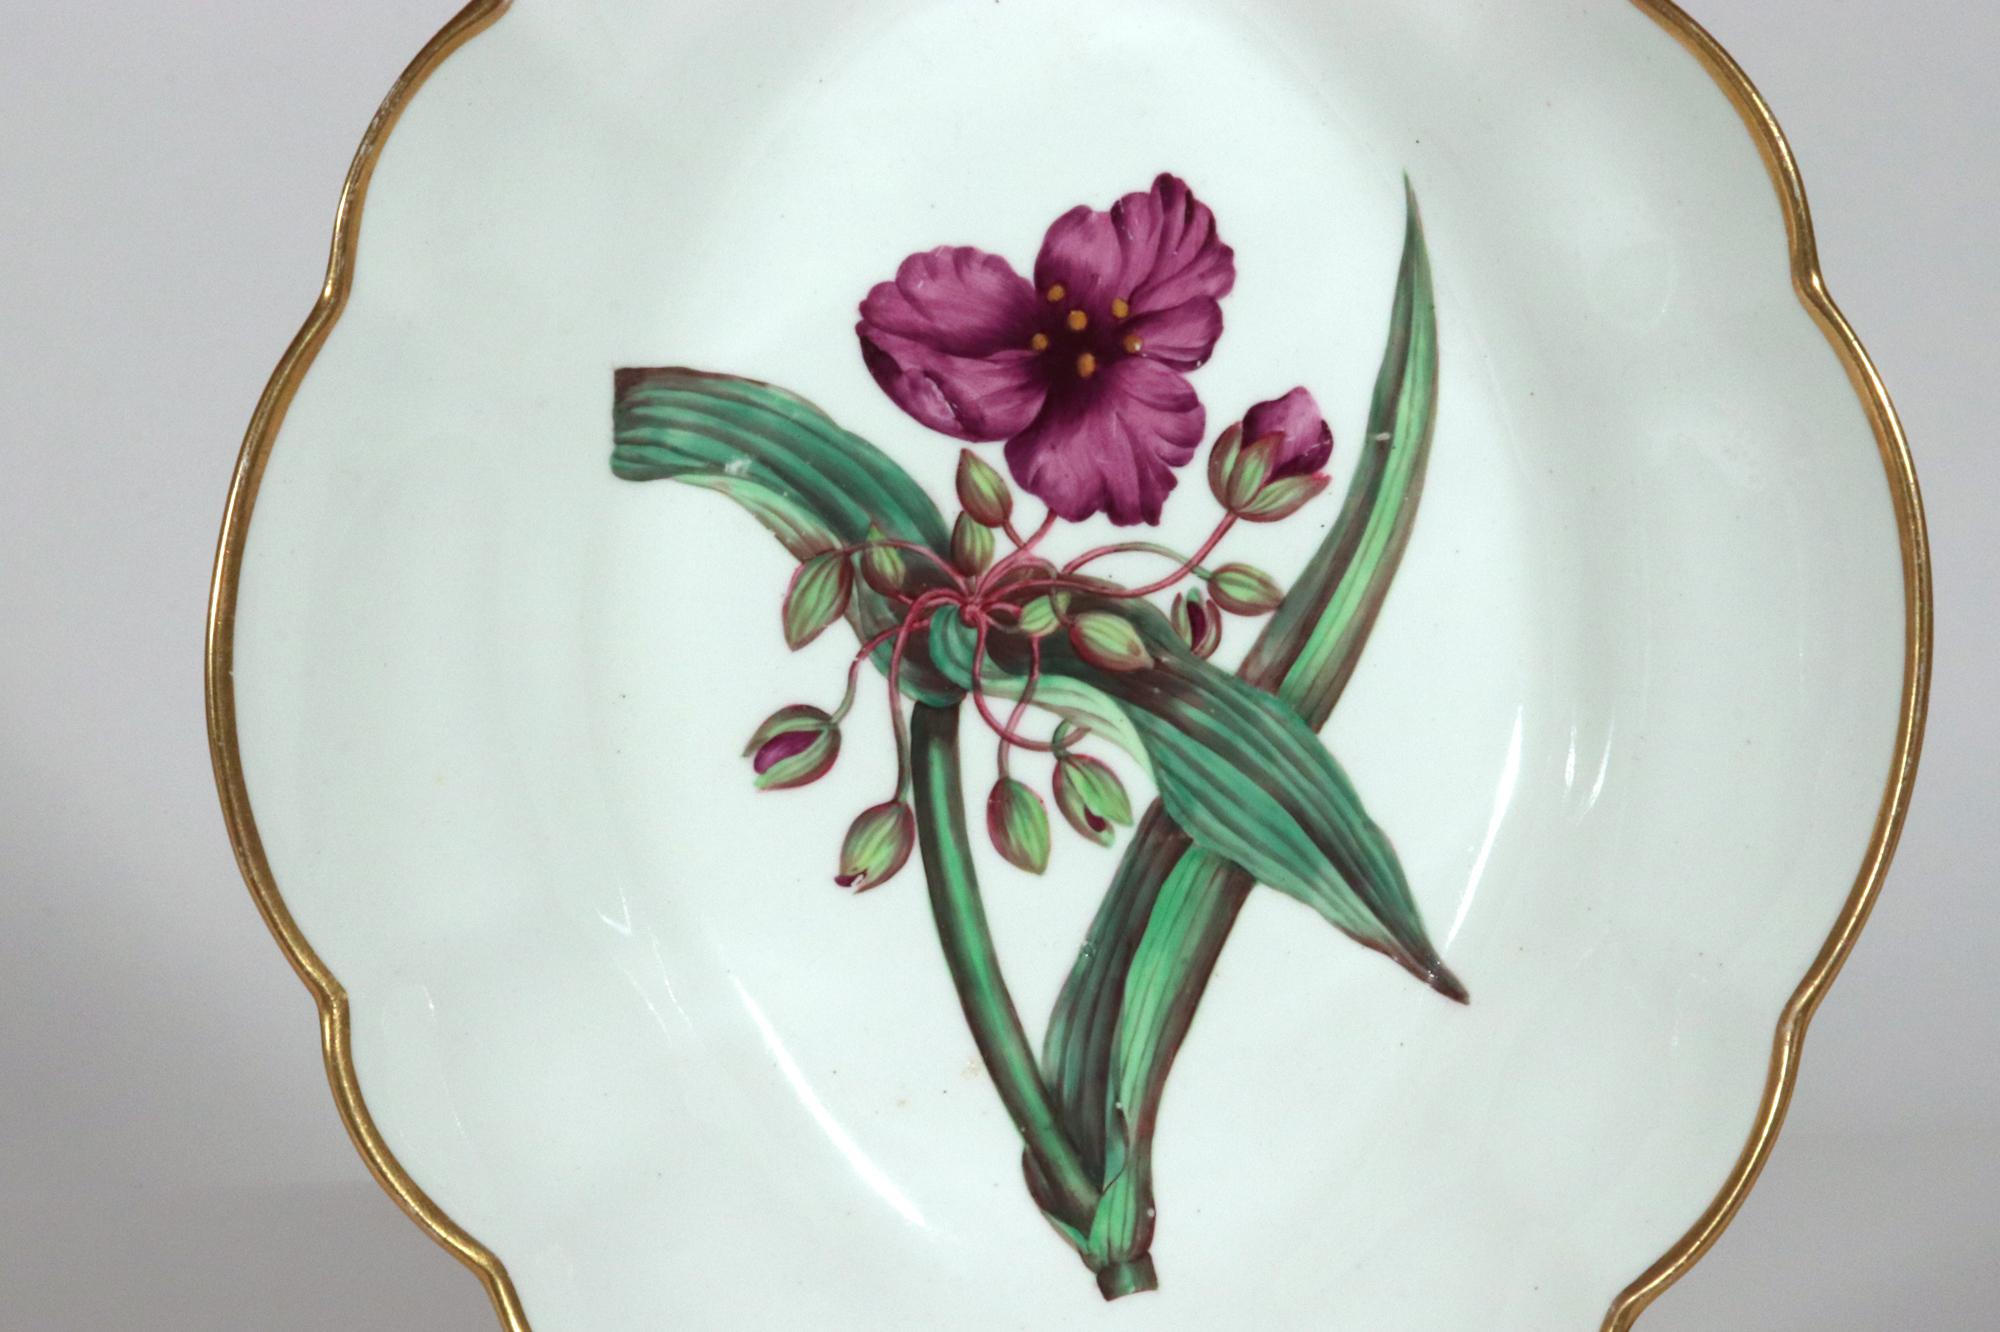 Spode Porcelain Botanical Specimen Dish,
Bulbocodium vernum, commonly called Spring Meadow Saffron, 
After William Curtis
Circa 1810-20

The botanical is after William Curtis's The Botanical Magazine illustrated by James Sowerby.  The image shows